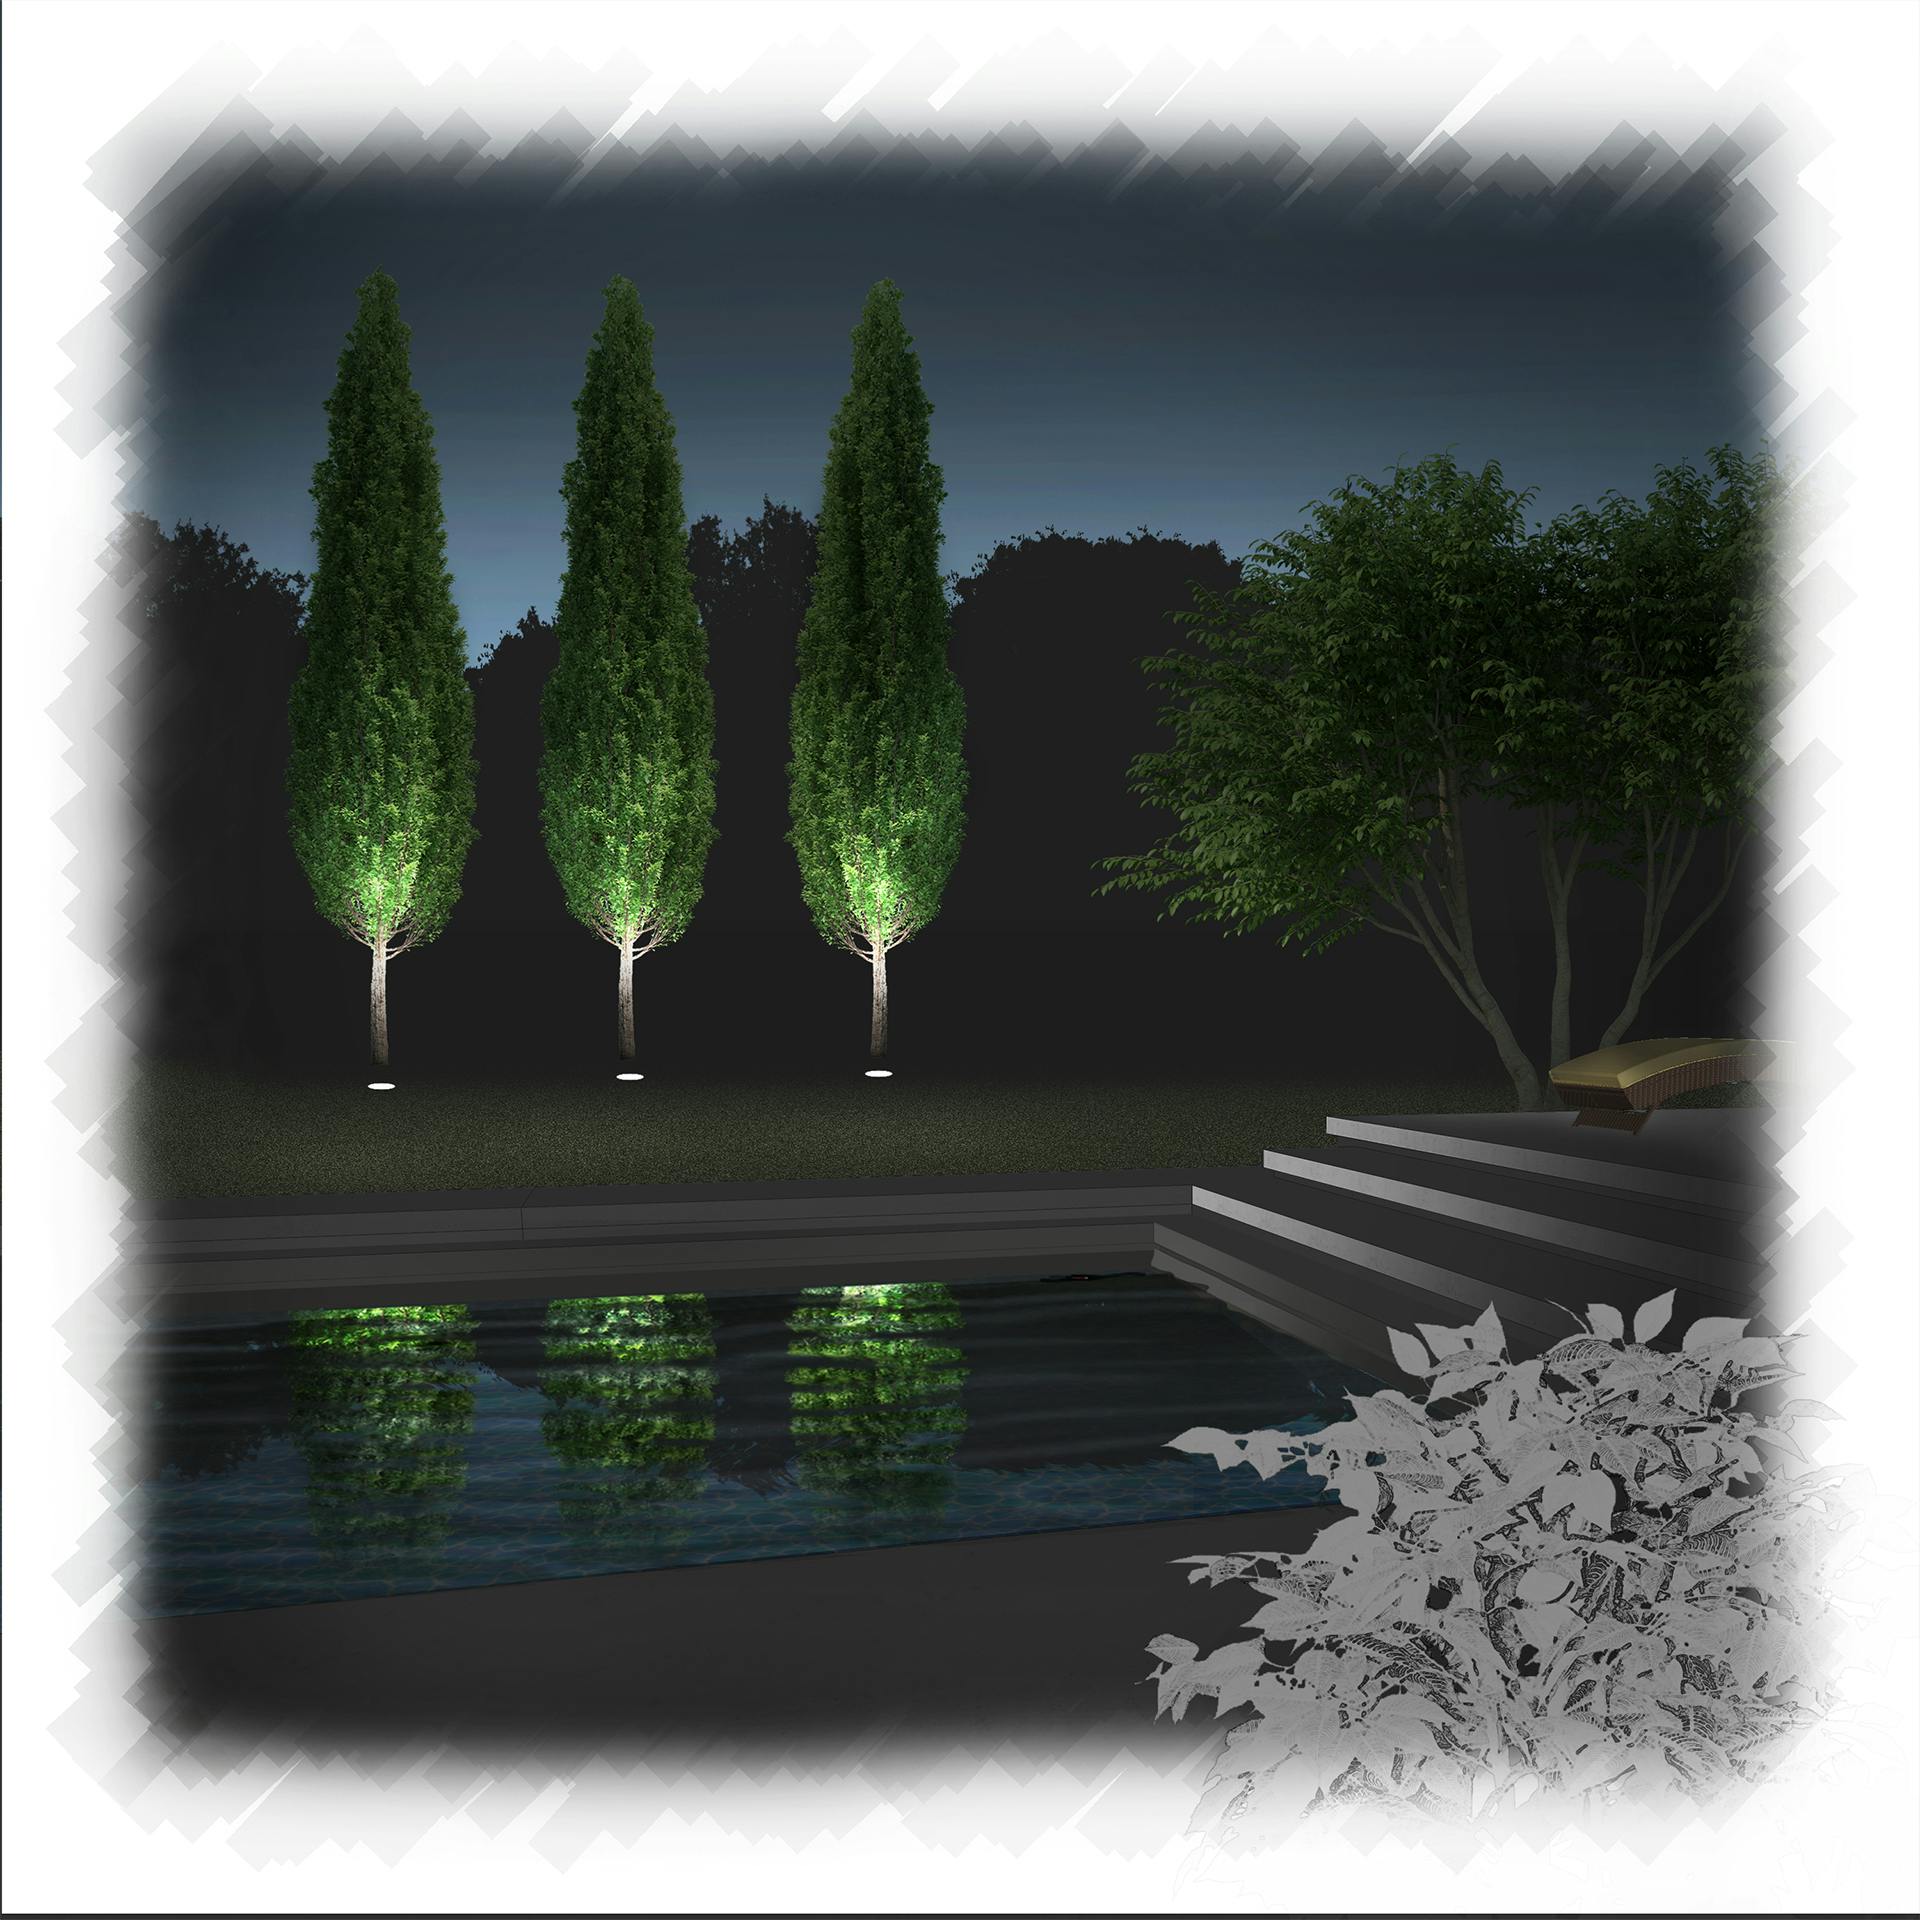 Illustration of a pool with shrubs that have uplighting and creating a lit reflection